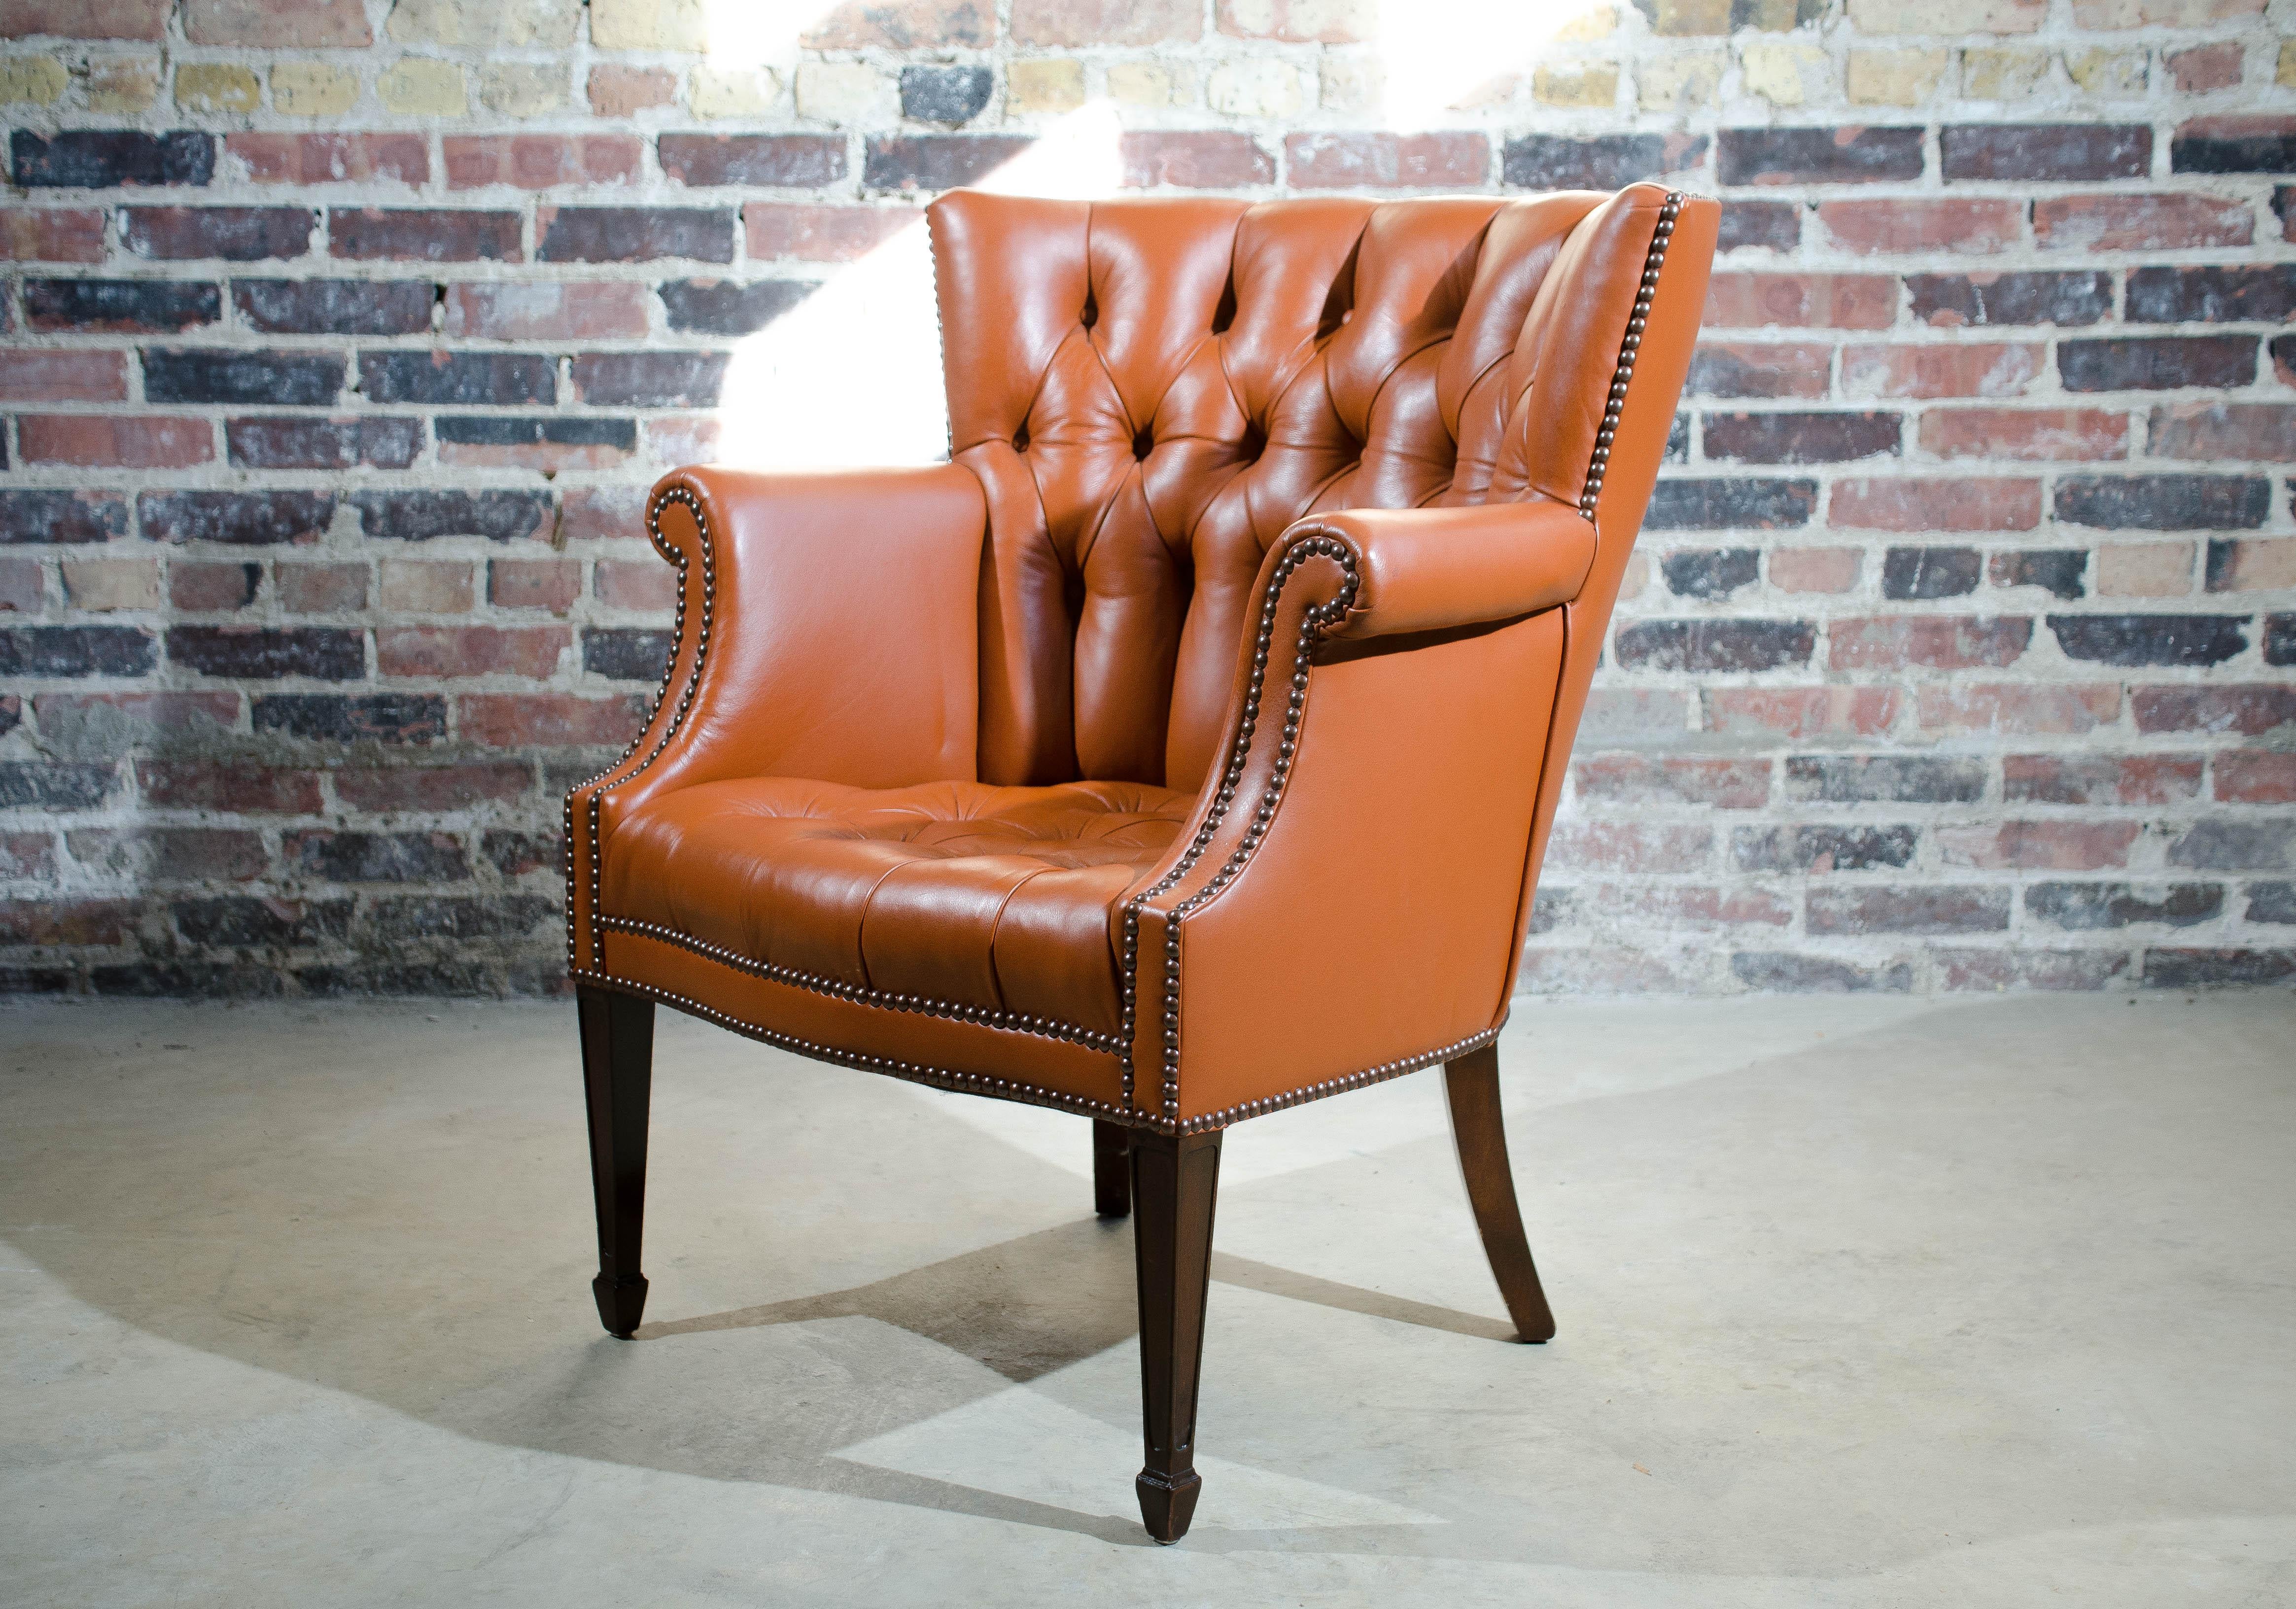 A fully restored, perfectly sized, 1930s tufted Baker wing back chair. Beautiful smaller scale chair, reupholstered with a soft and supple Holly Hunt high quality leather.  The leather is a luscious warm spice color. Legs are stained dark walnut. It